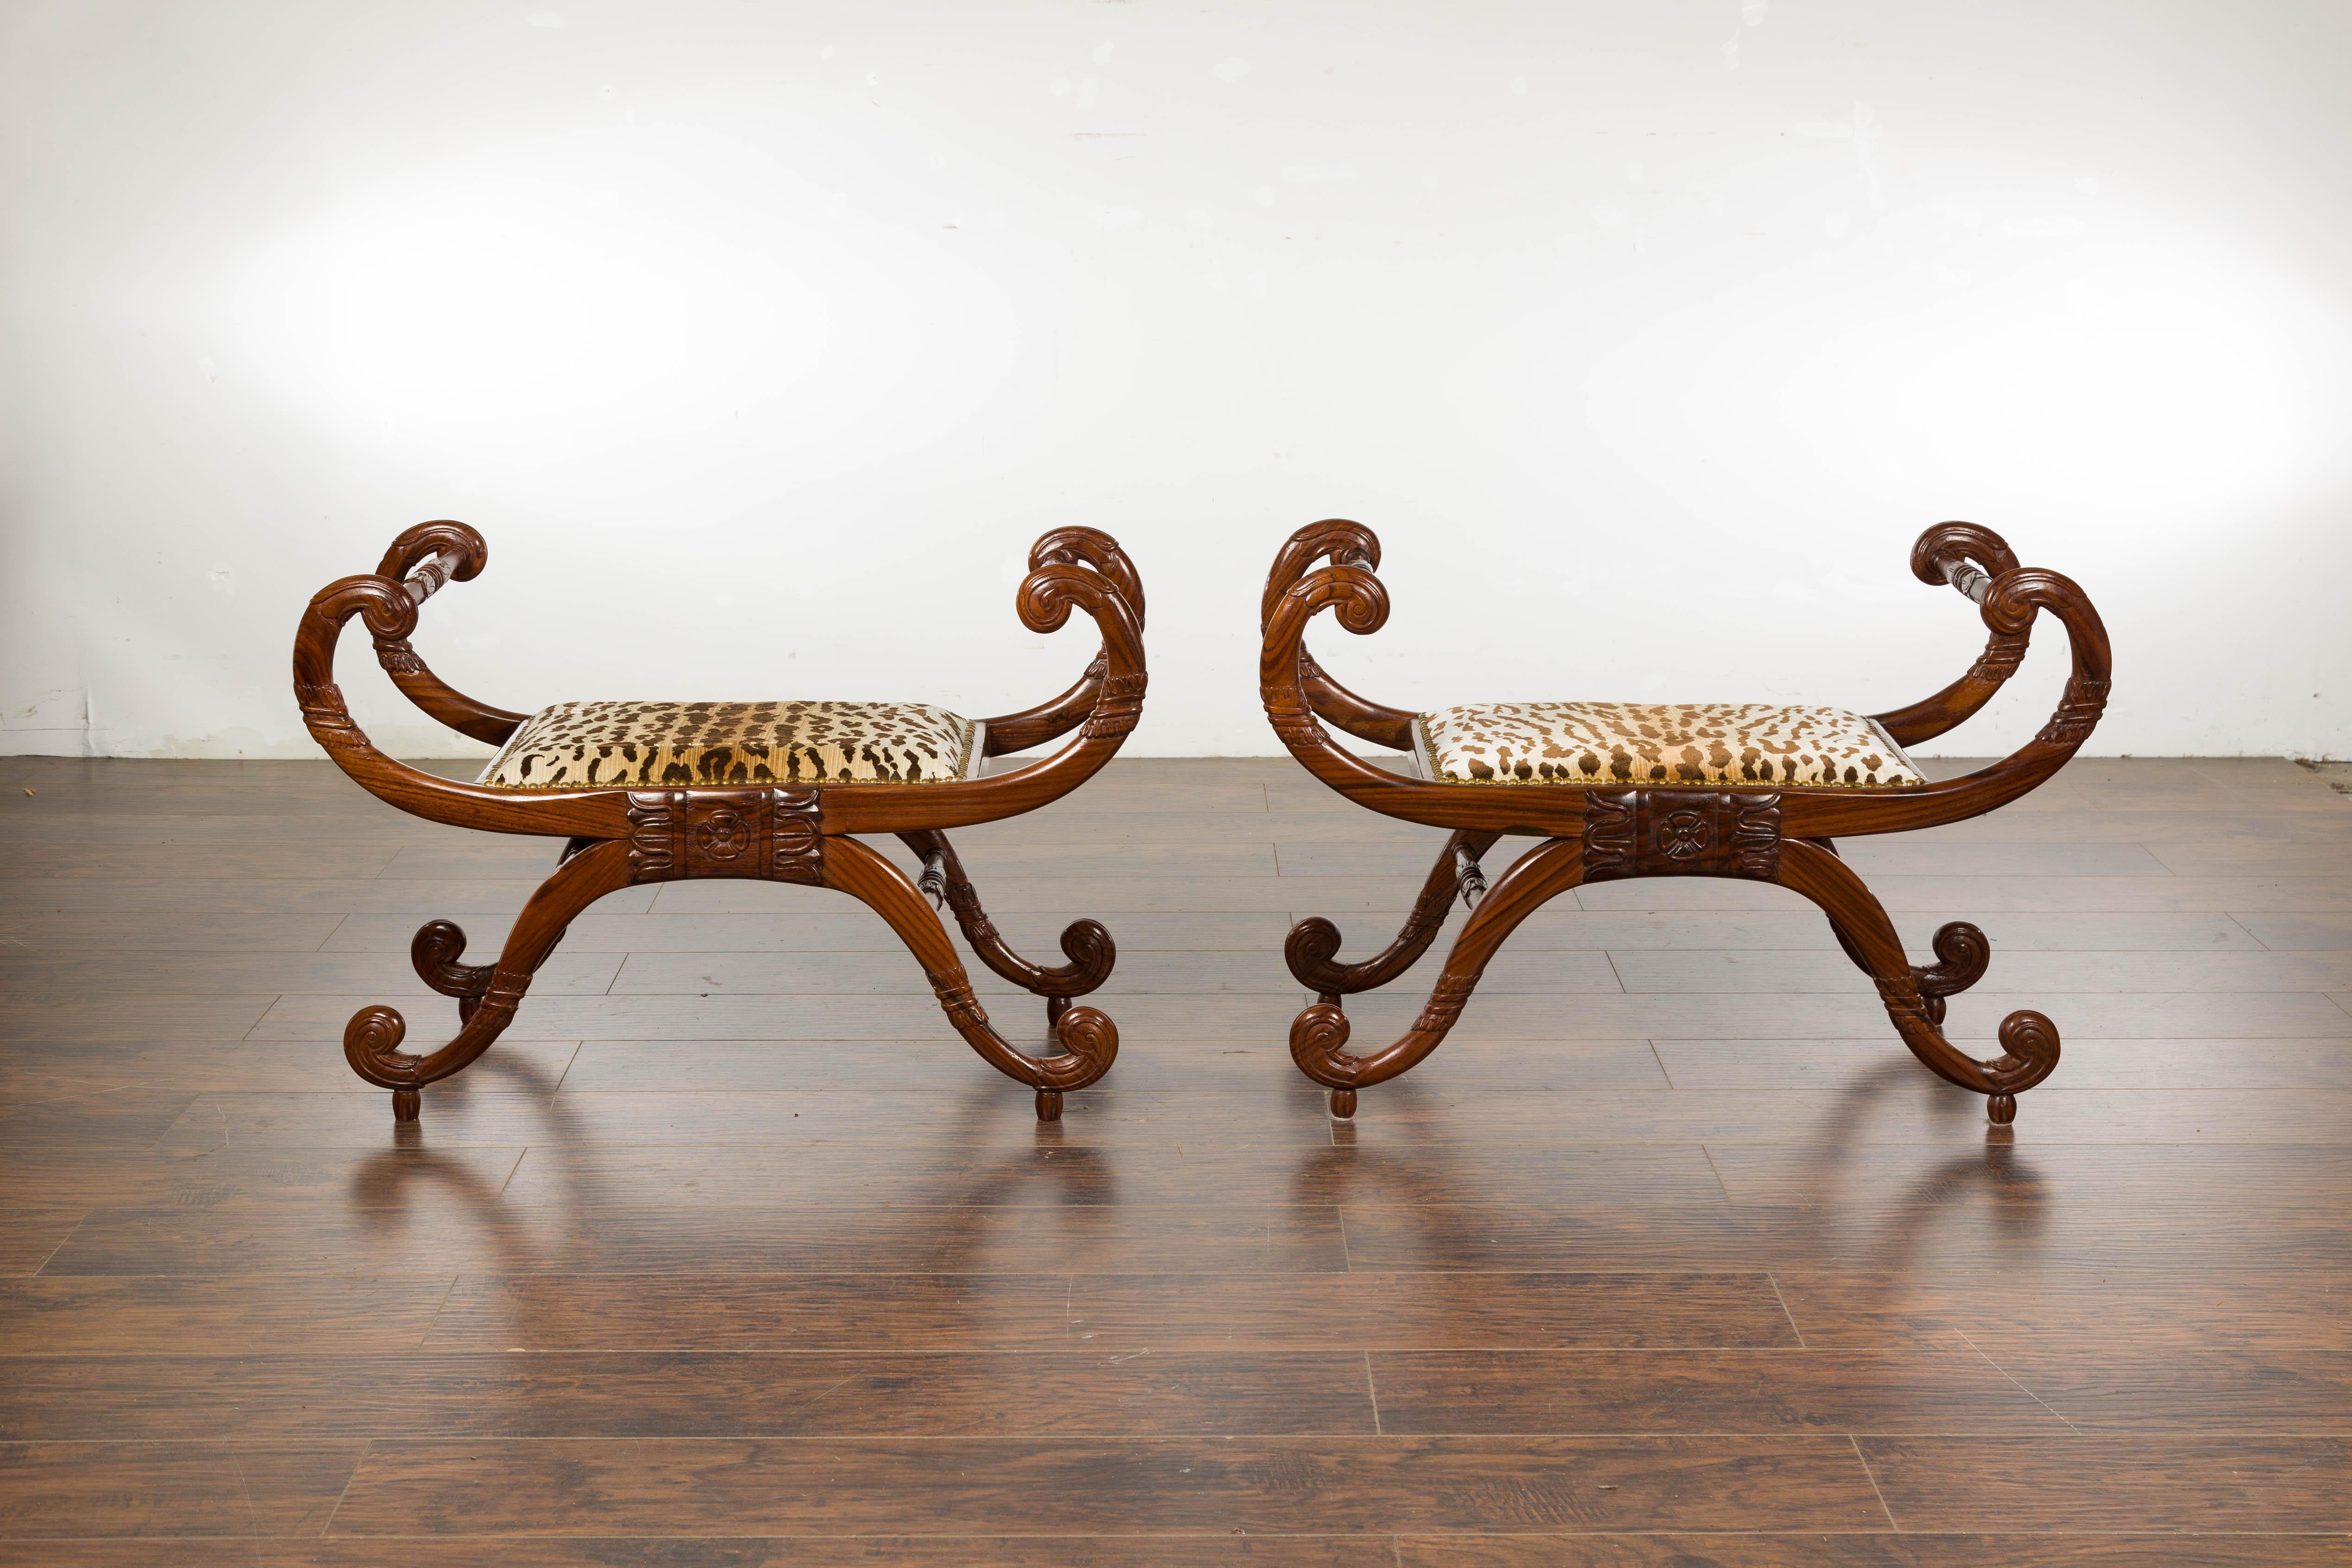 Pair of English Regency Carved Mahogany 19th Century Stools with Scrolling Arms  In Good Condition For Sale In Atlanta, GA